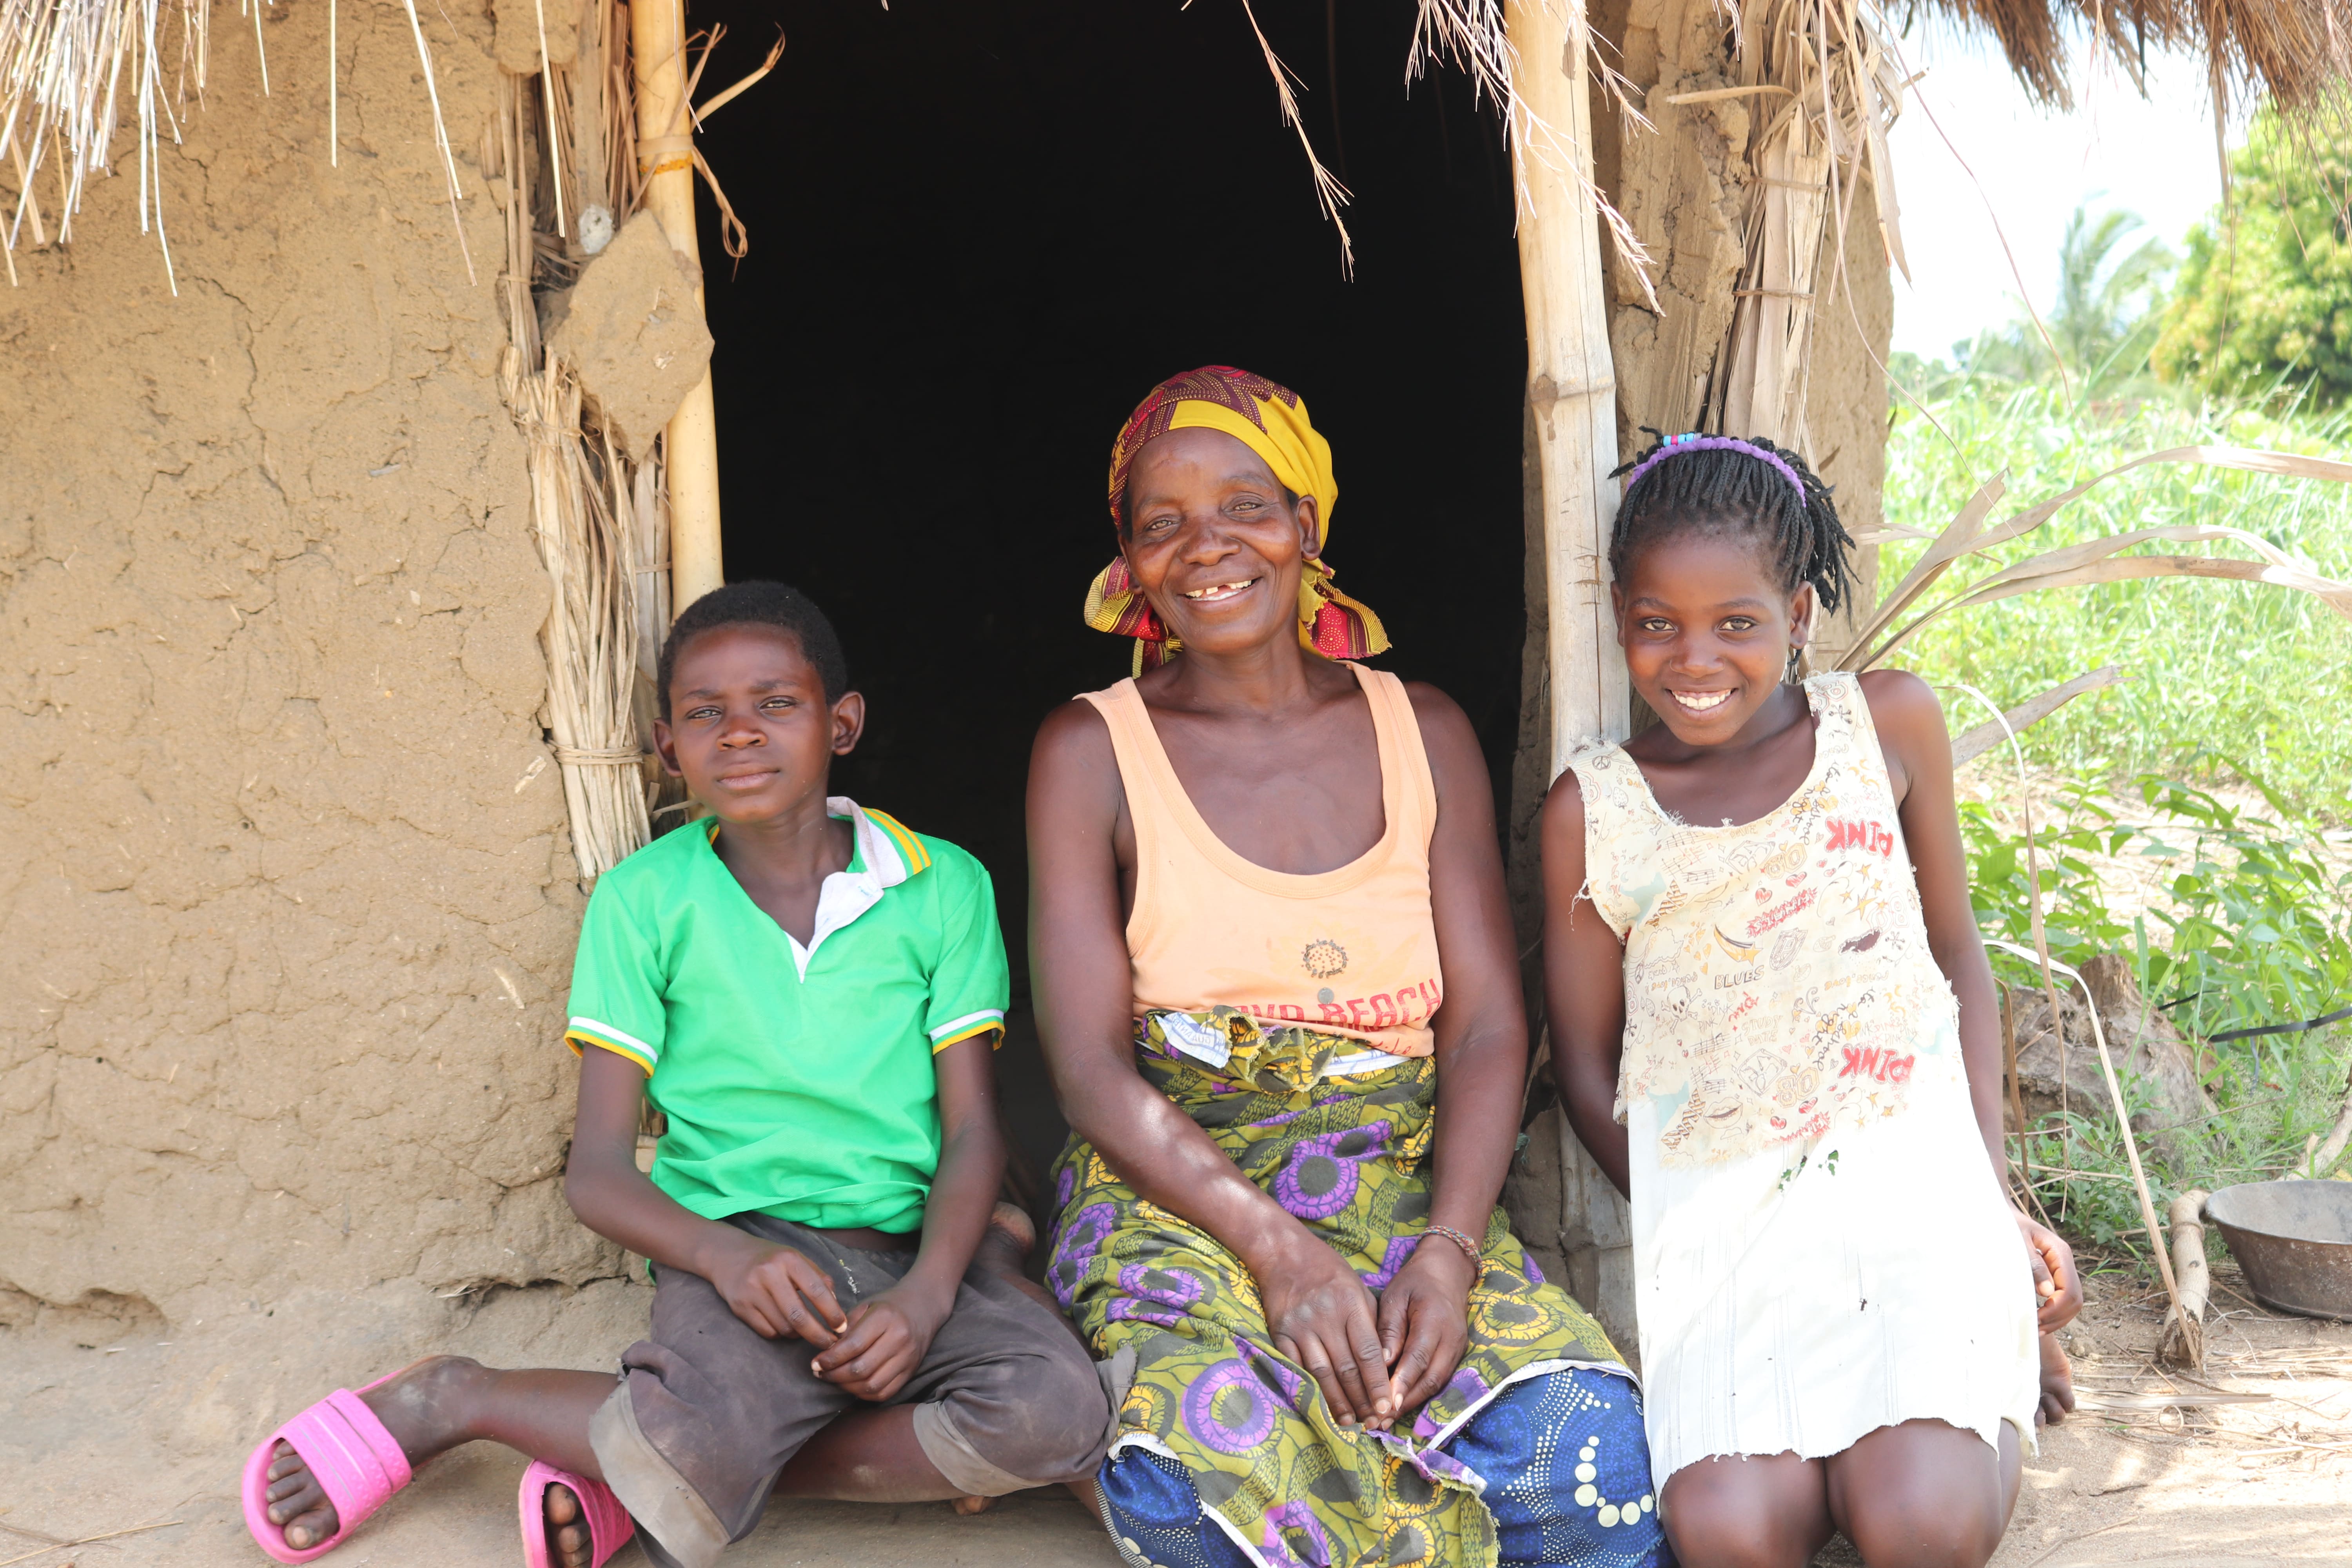 Laurinda, Jorge and their mother Julieta are sitting in front of their their small hut